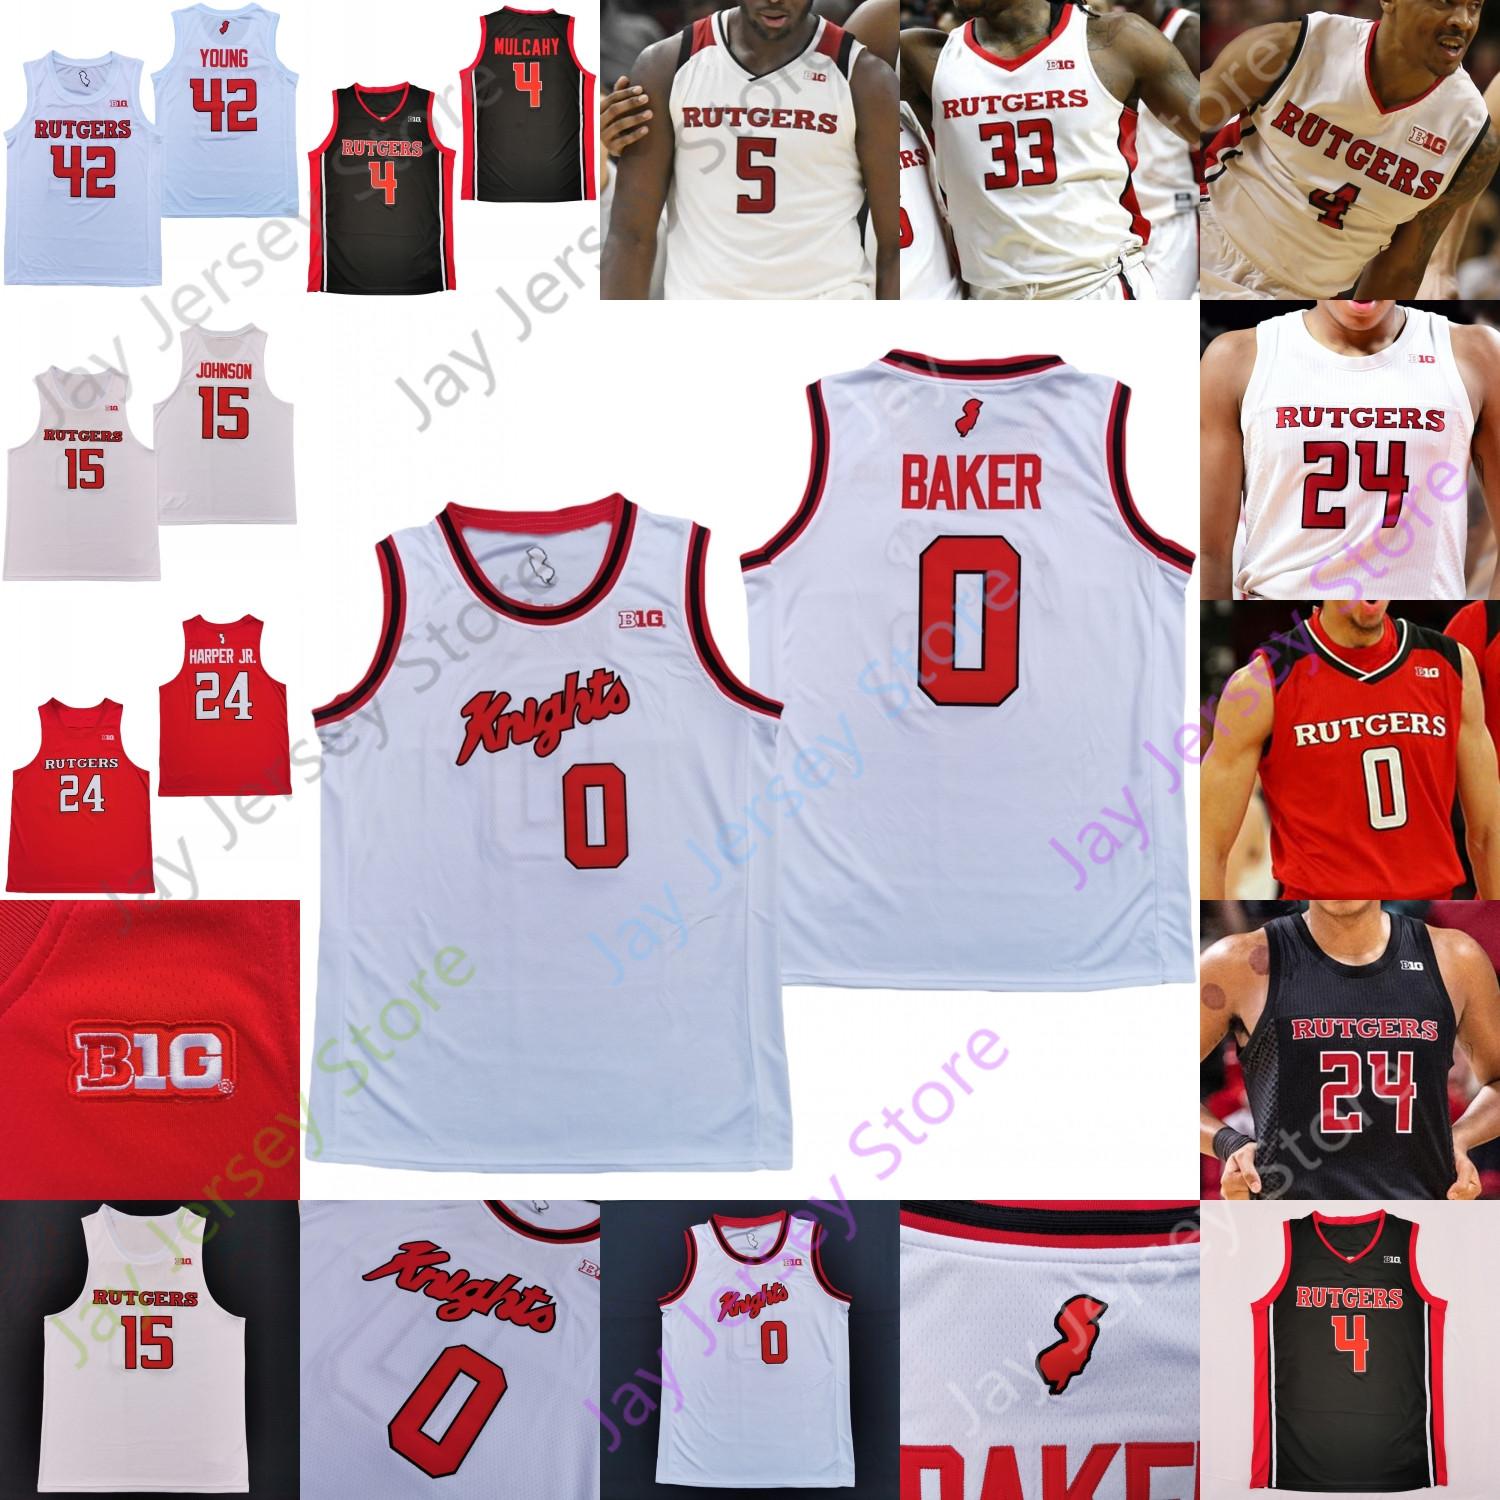 

2022 Rutgers Scarlet Knights Basketball Jersey NCAA College Clifford Omoruyi Montez Mathis Paul Mulcahy Mamadou Doucoure Mag Palmquist Reiber, Black